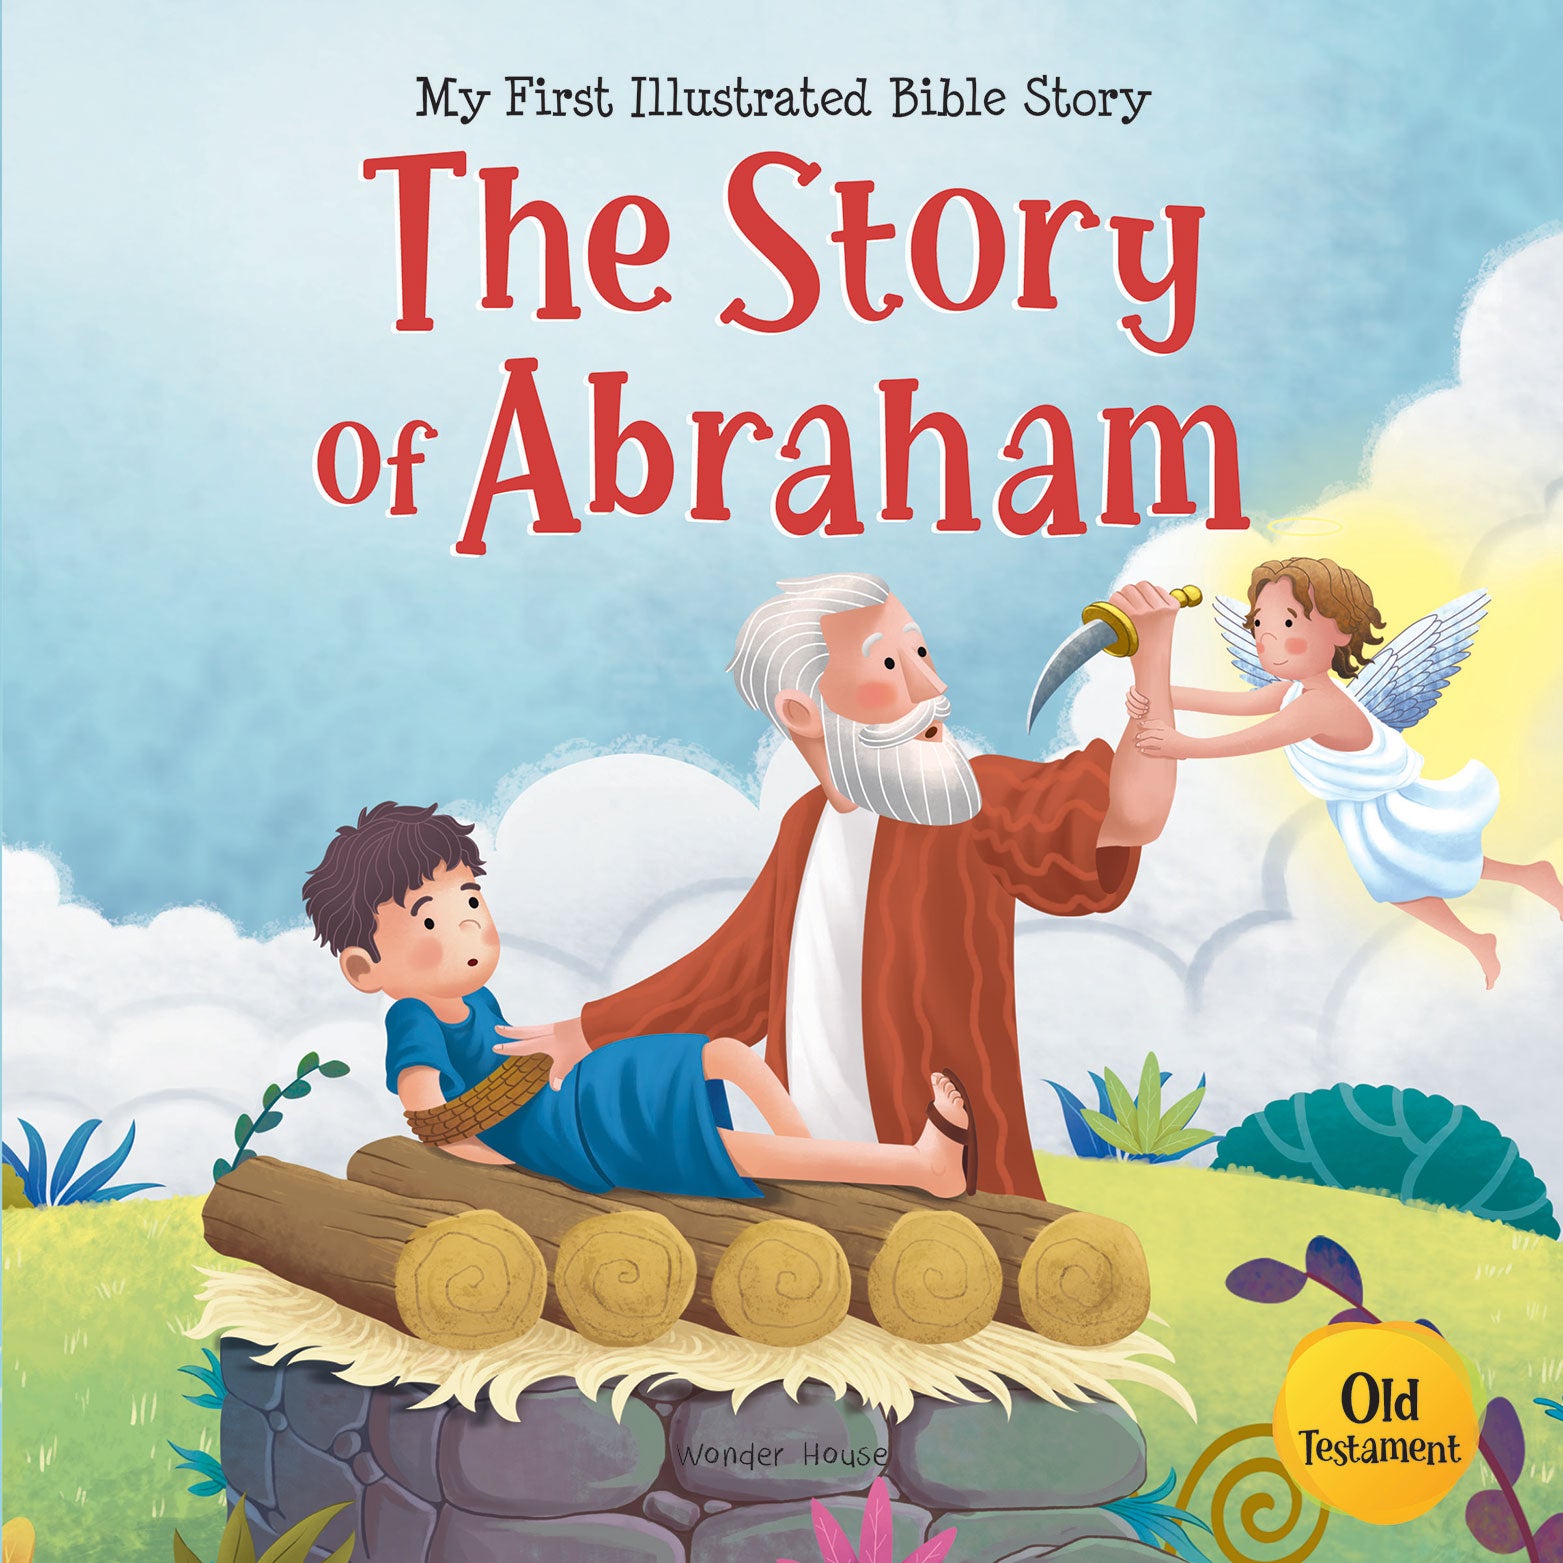 My First Illustrated Bible Story: The Story of Abraham